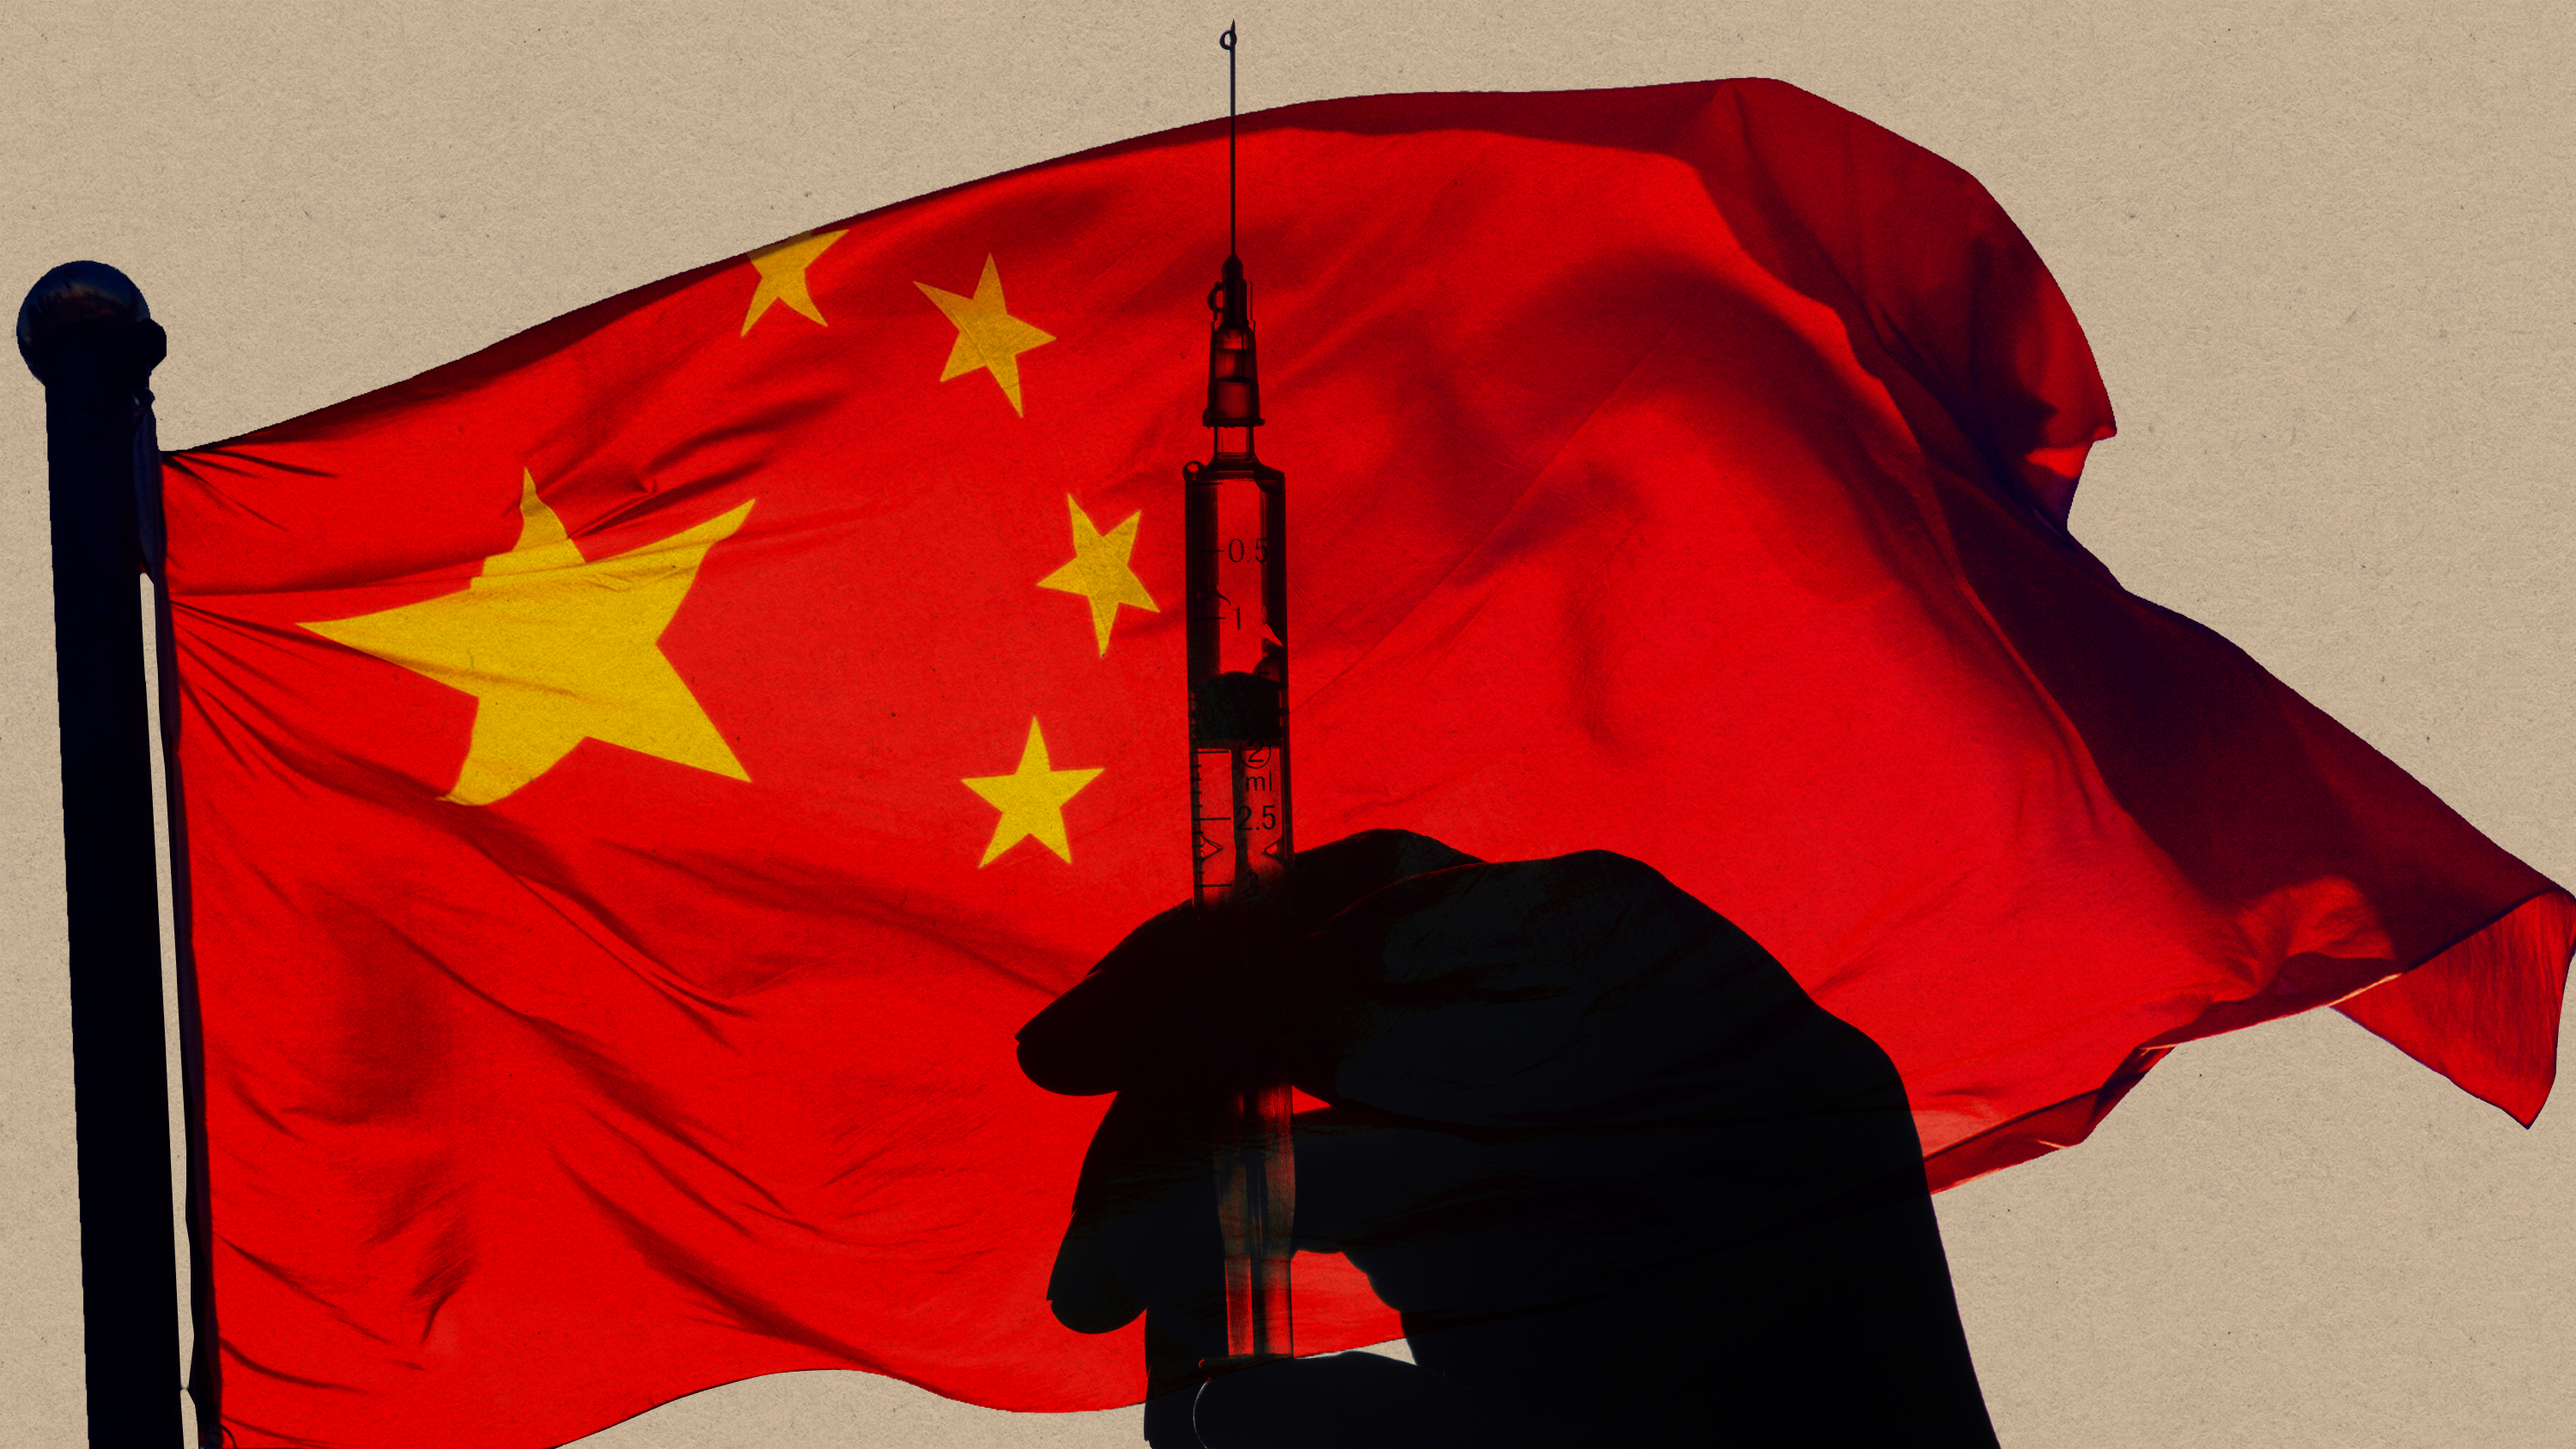 An illustration of a silhouette of a hand with a vaccine against the Chinese flag